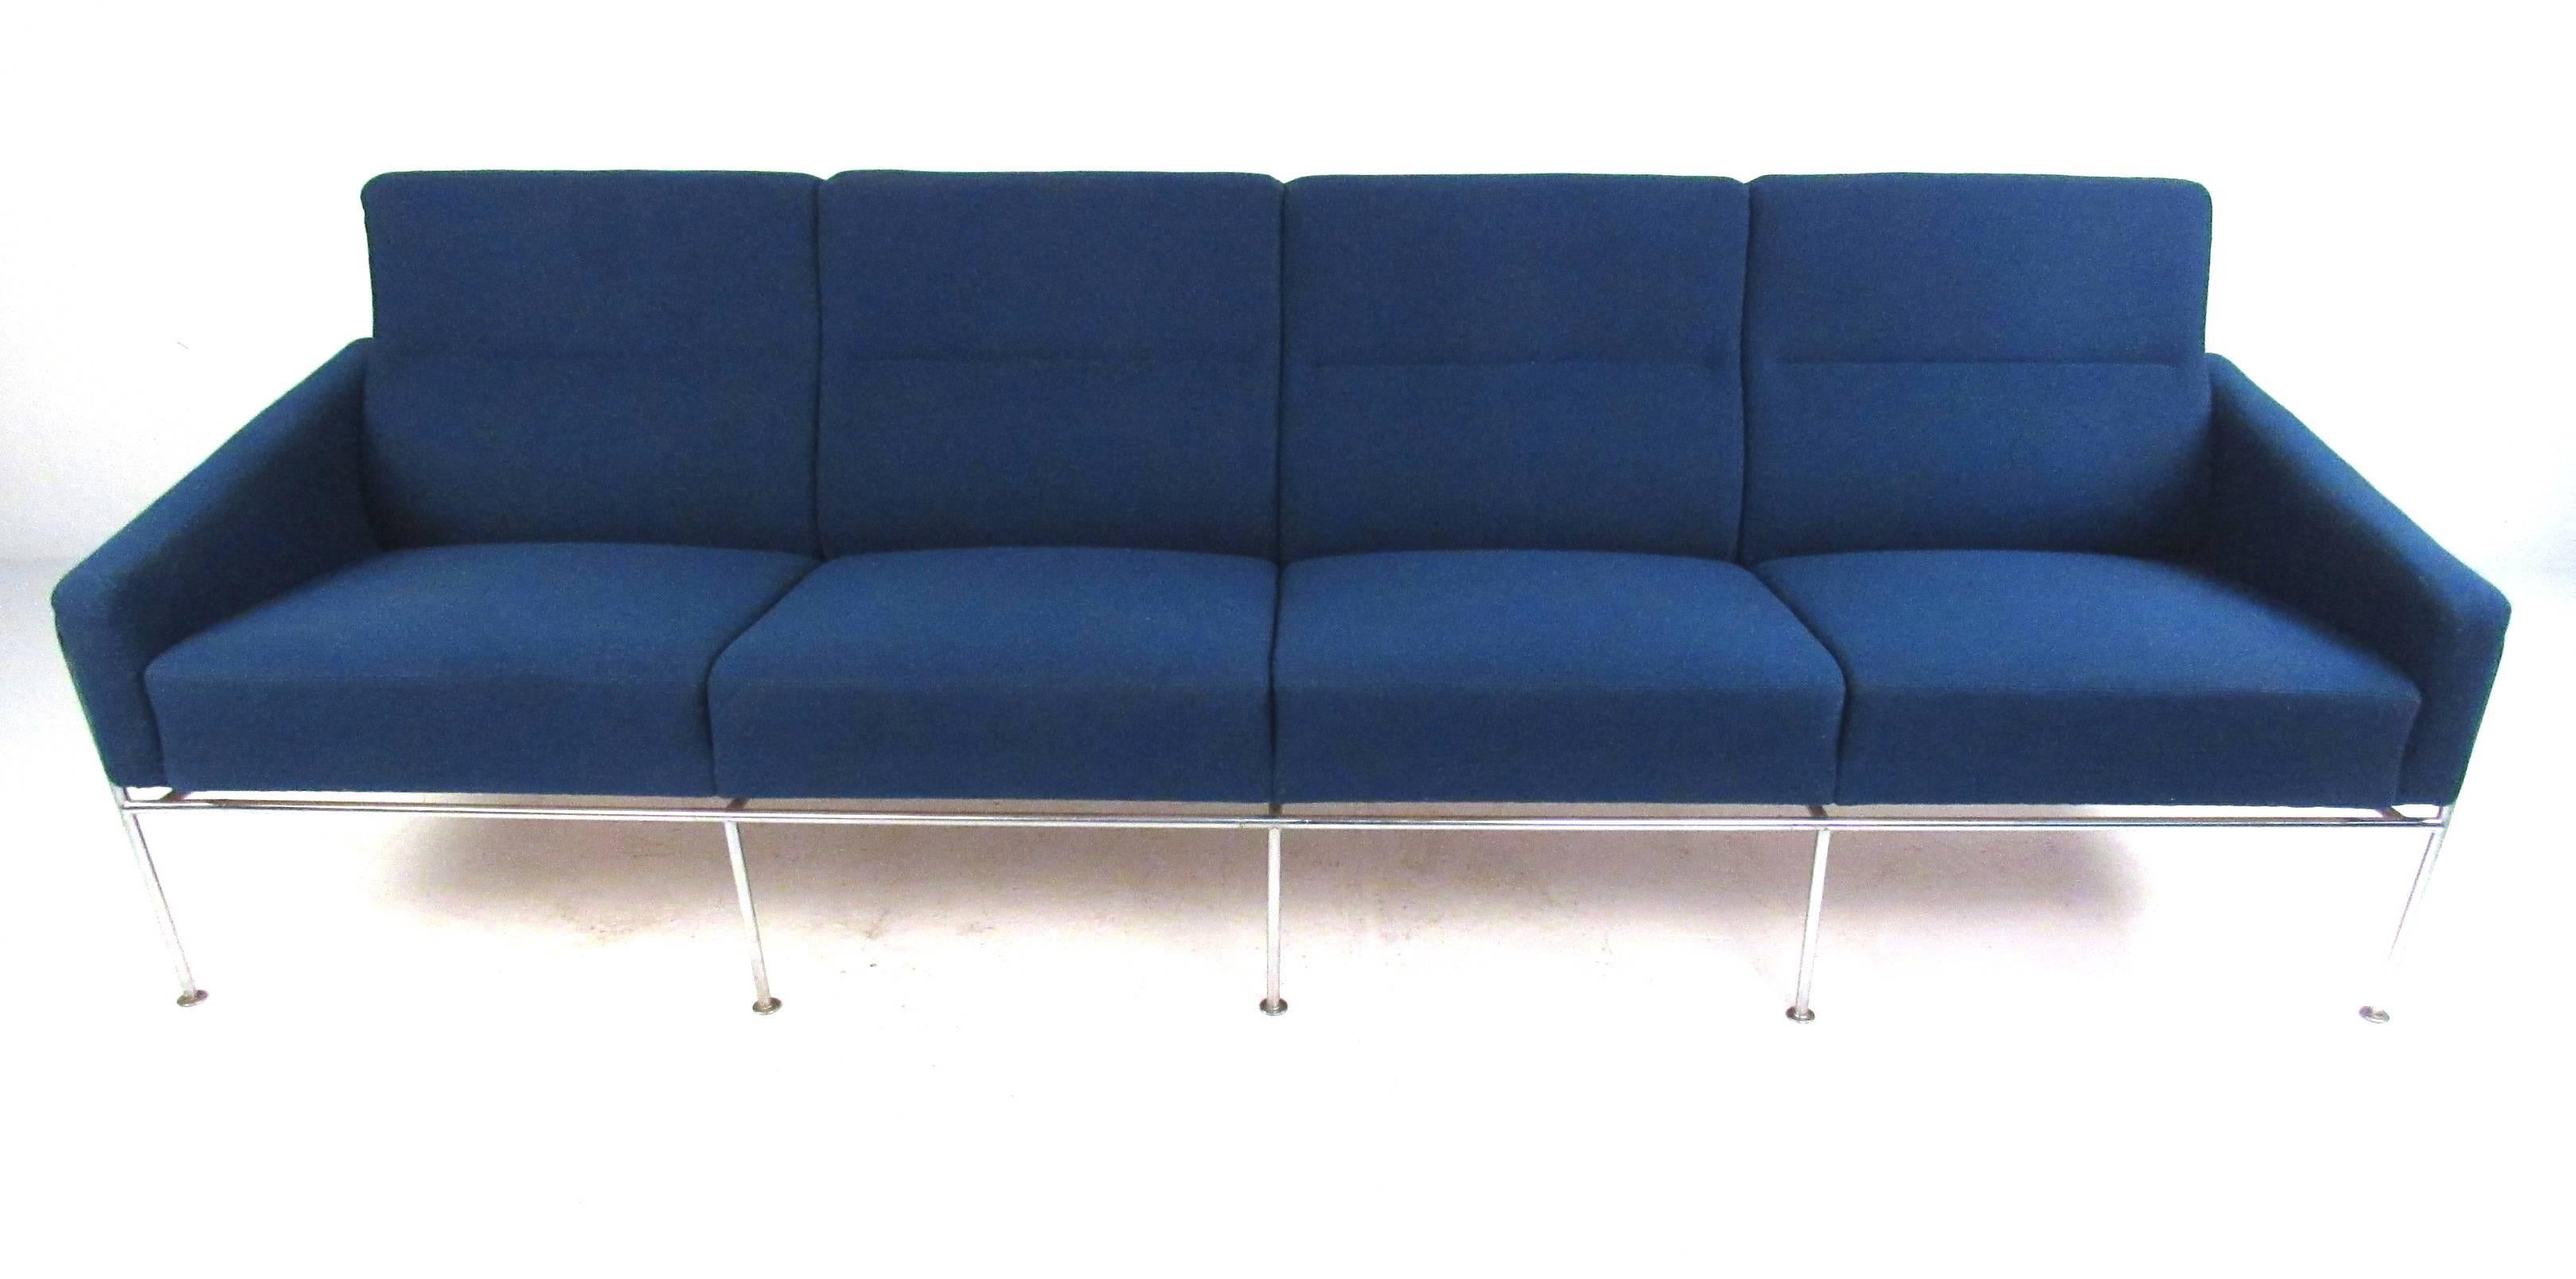 Classic Airport sofa designed by Arne Jacobson in 1957 for the SAS Royal Terminal. This model was manufactured in 1989 and is in very good condition. Please confirm item location (NY or NJ) with dealer.